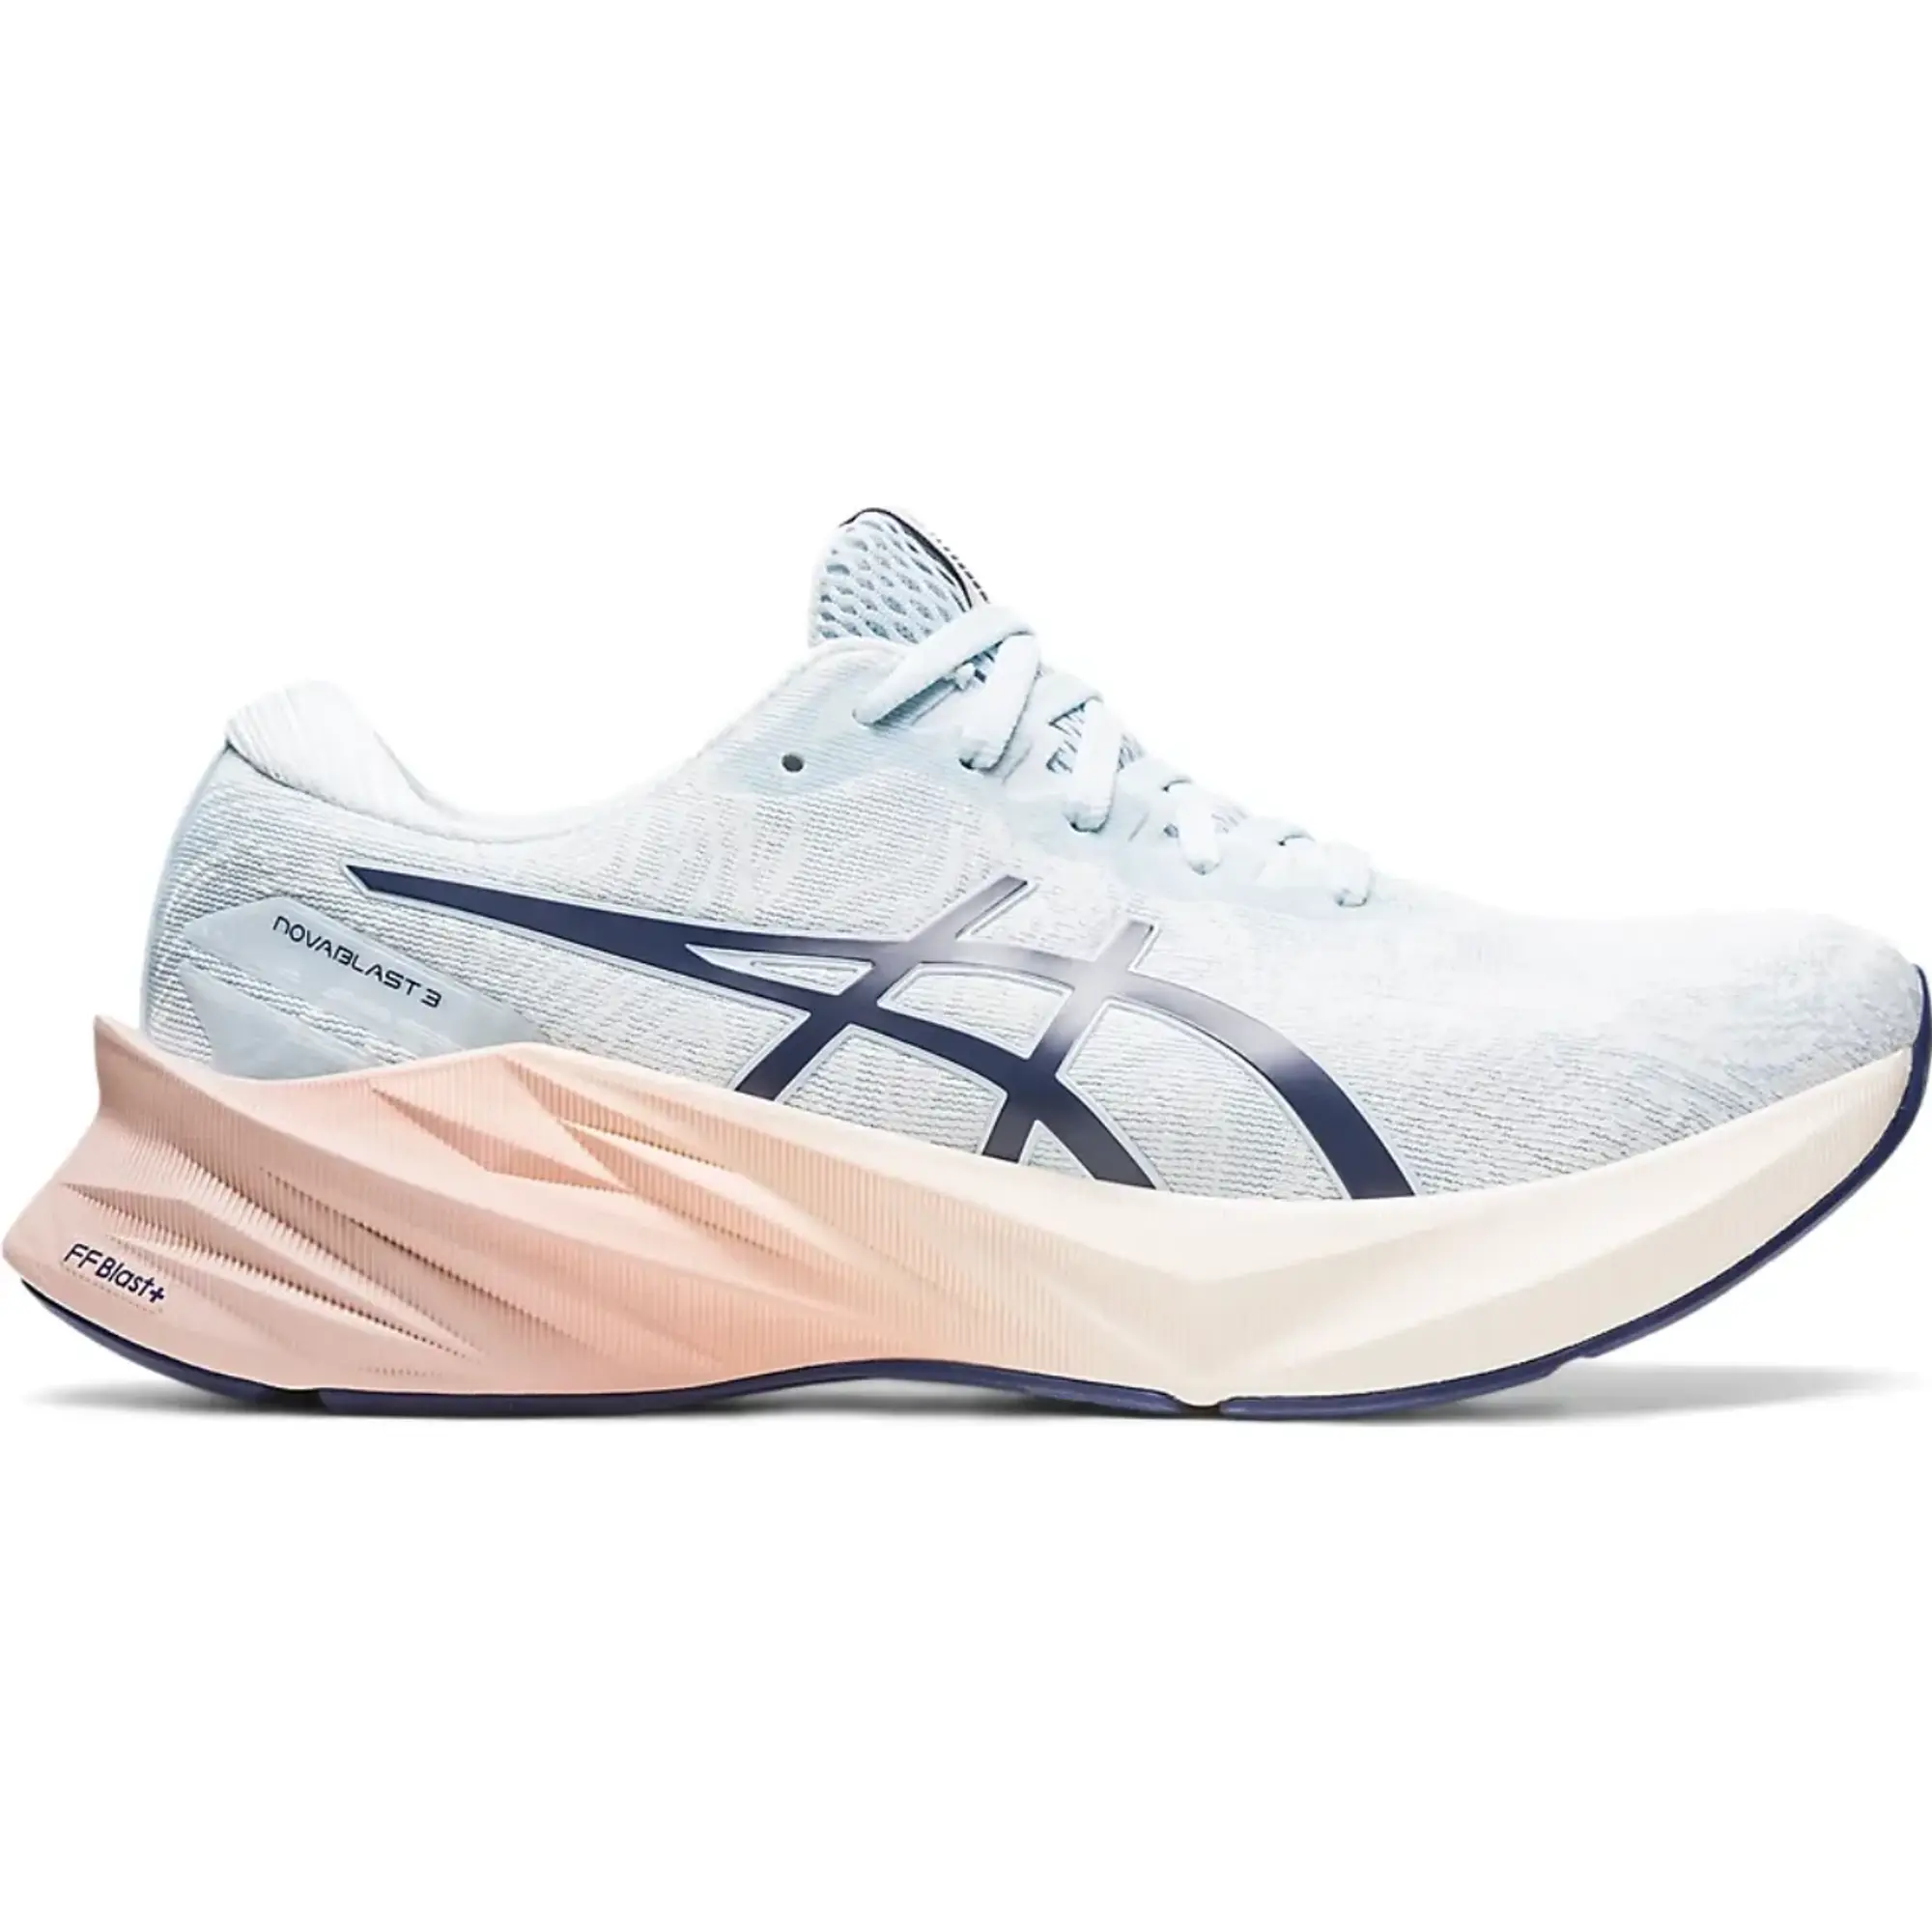 Asics Running Novablast 3 Nagino Chunky Trainers With Contrast Sole In Light Blue